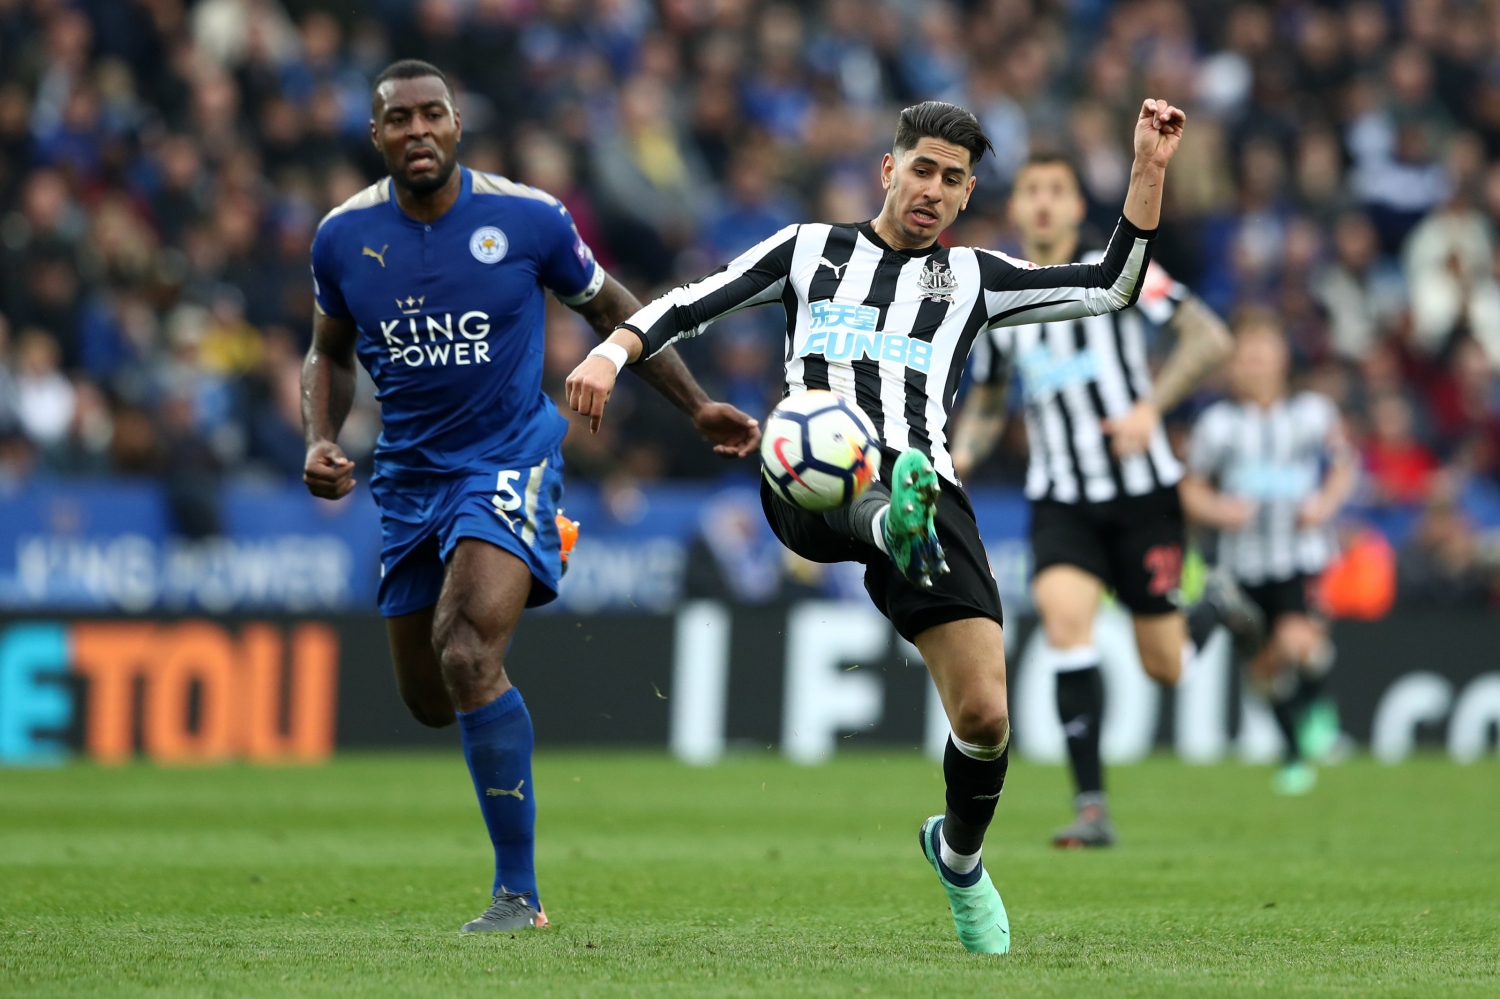 soi-keo-leicester-city-vs-newcastle-united-vao-21h-ngay-12-12-2021-1